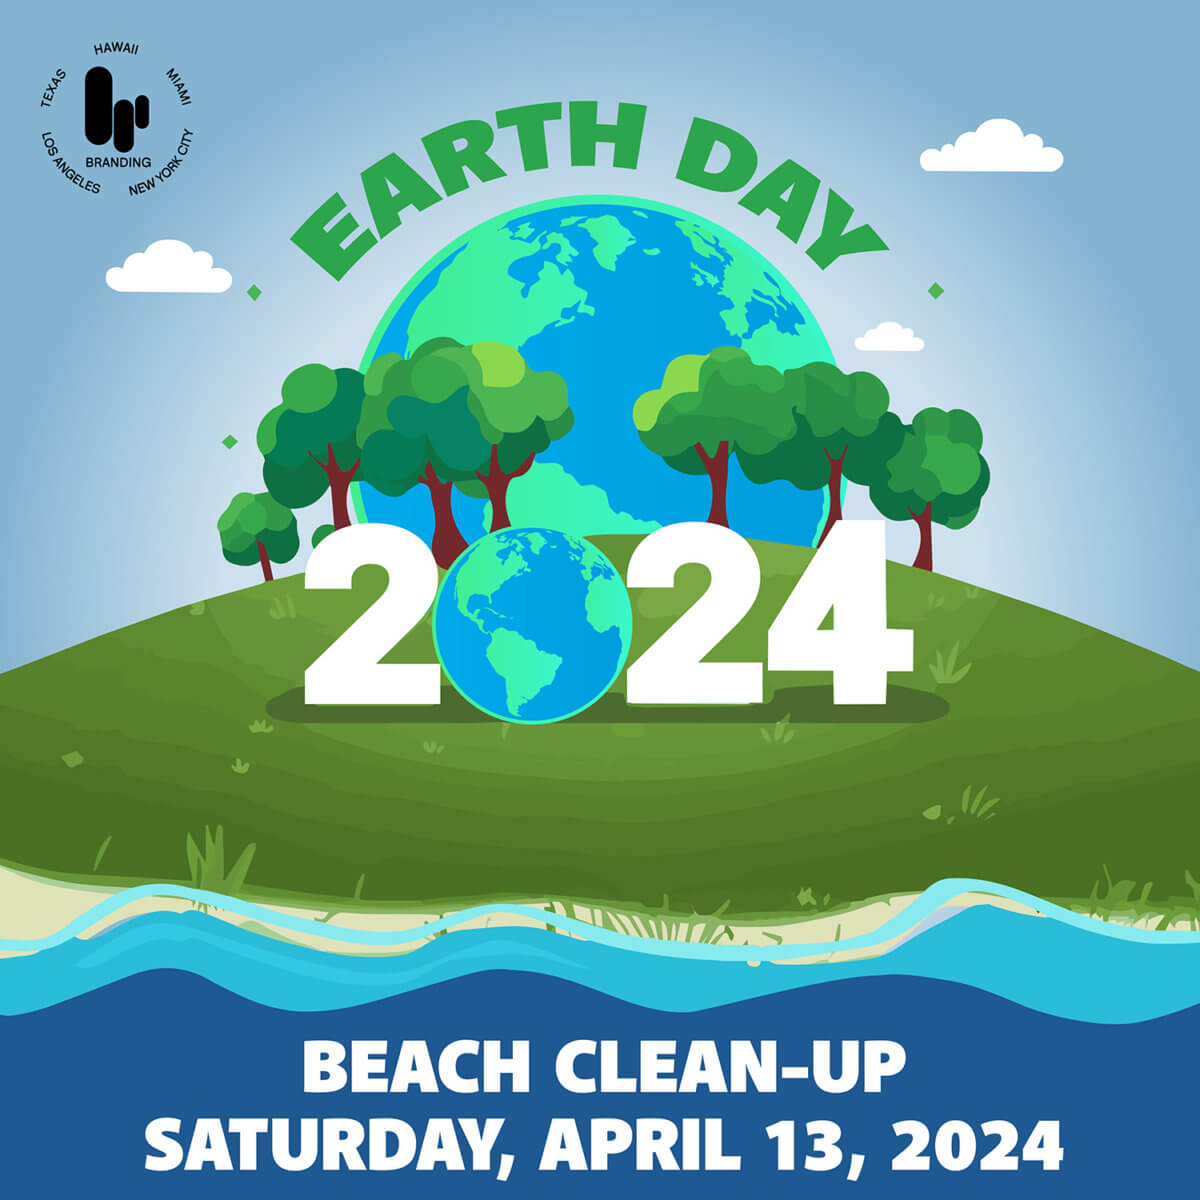 We are proud to invite you to join our 2024 Earth Day Beach Clean Up in Santa Monica. Last year’s was a blast and we plan to make this year’s event better! Come out and make a positive impact on your local community. bit.ly/3u3vHLh